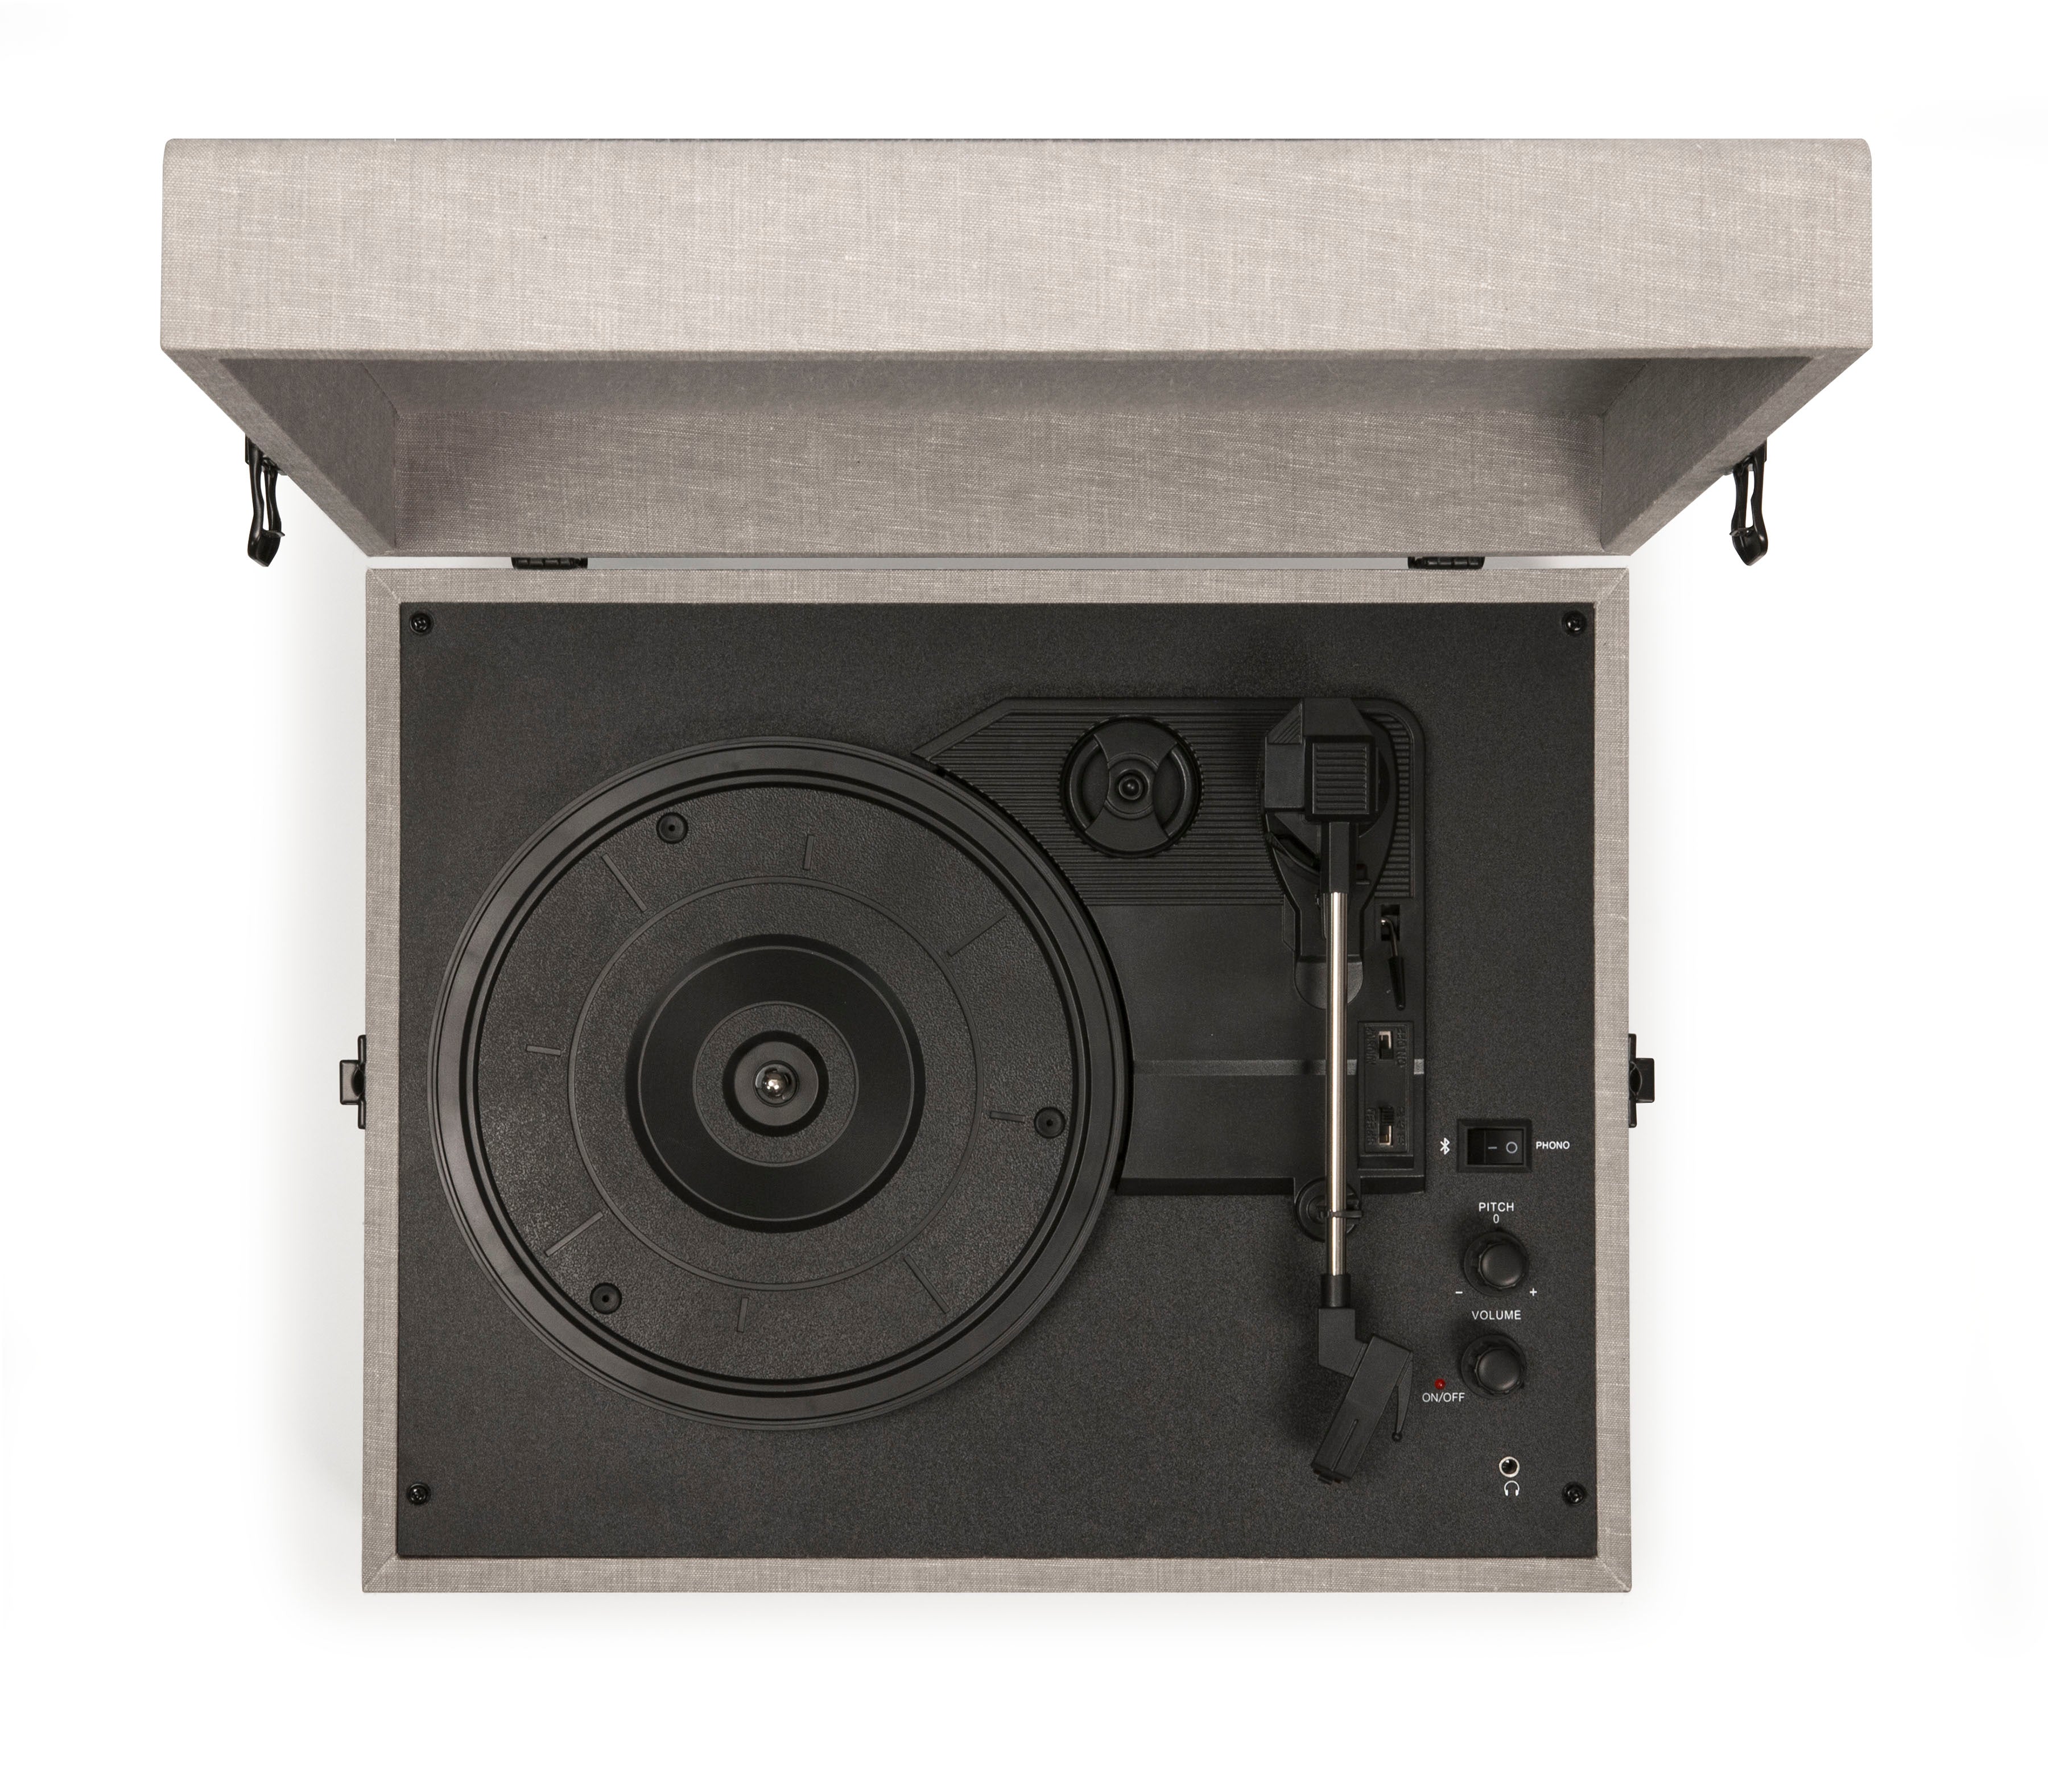 Portable 3-Speed Turntable Bluetooth + Record Stand - Crosley